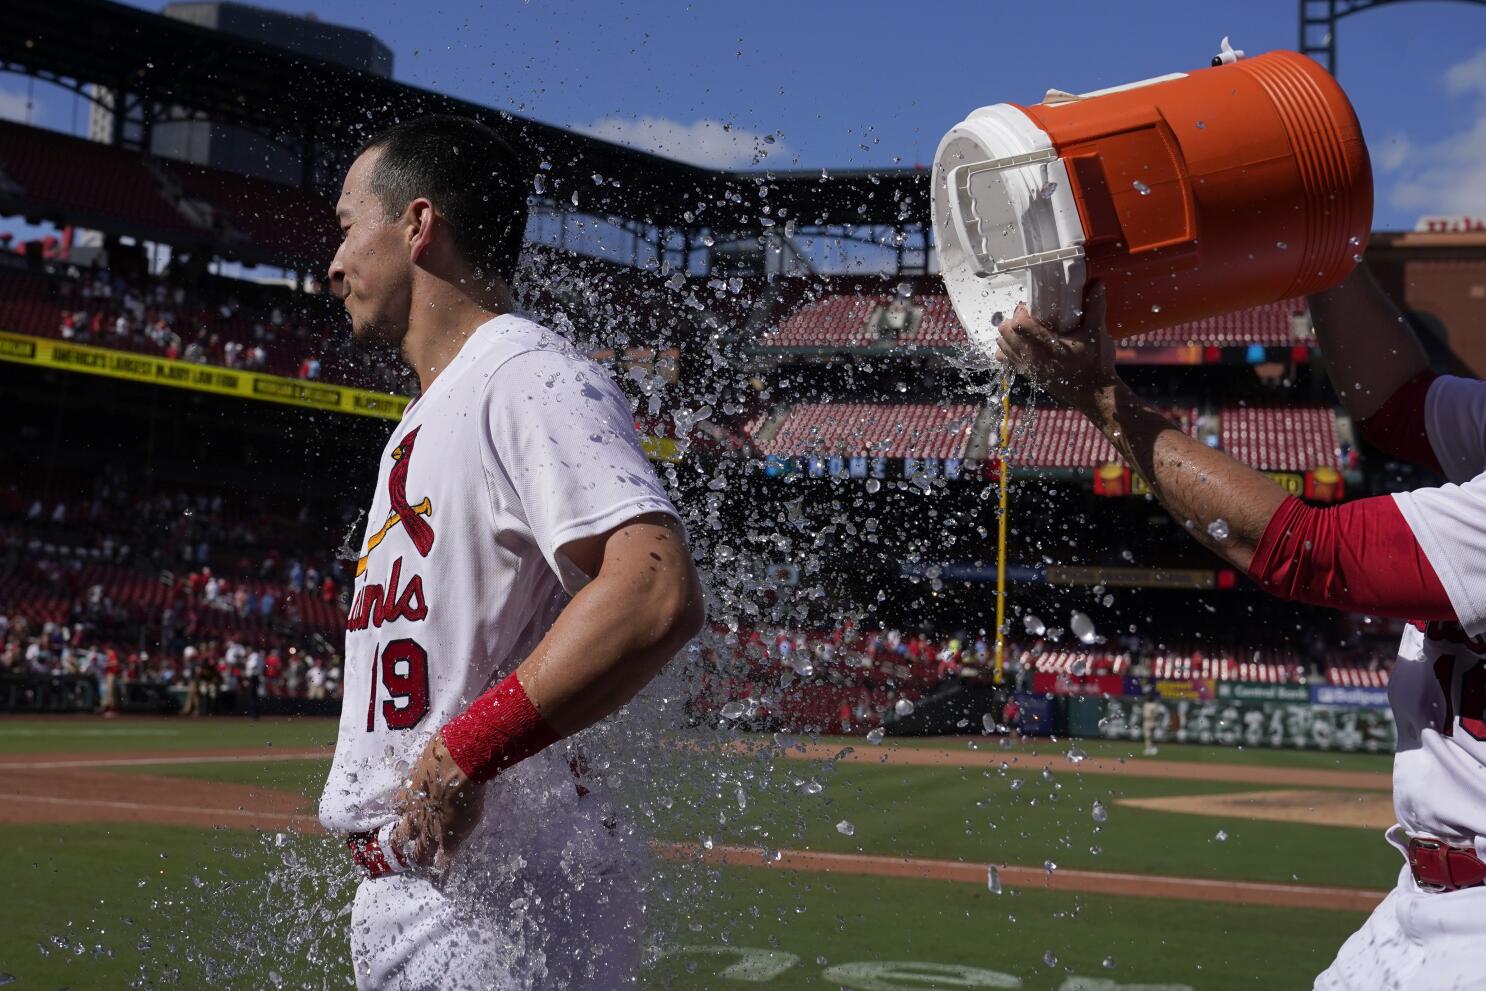 Edman absolves Cardinals' bases-loaded woes with walk-off hit Sunday